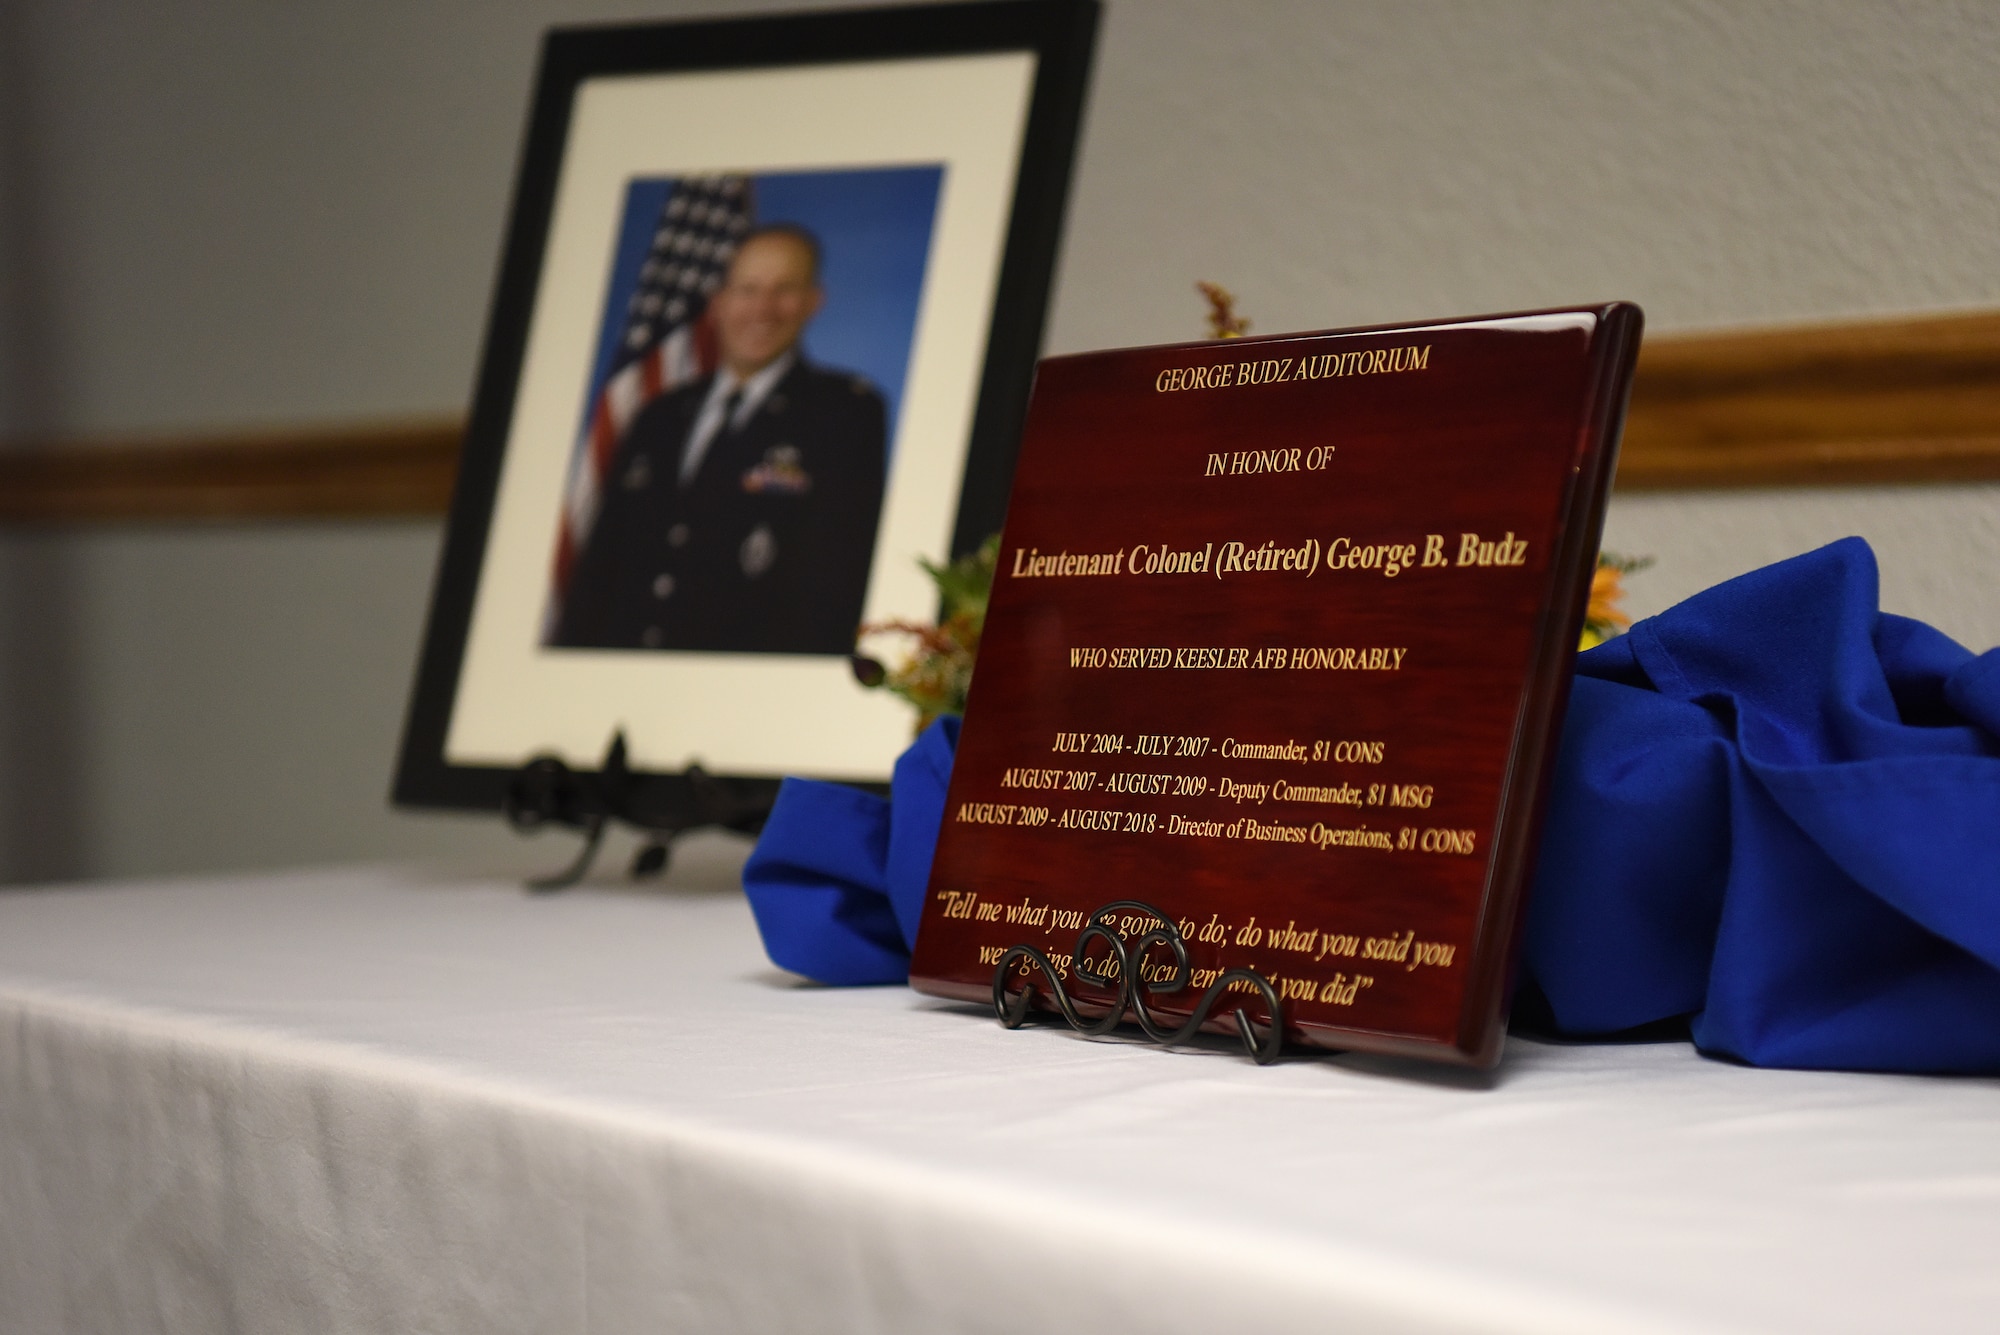 A plaque is displayed during the Sablich Center Auditorium room dedication ceremony for George Budz inside the Sablich Center at Keesler Air Force Base, Mississippi, Oct. 31, 2019. The auditorium has been renamed after Budz who passed away Aug. 3, 2018. Budz served as the 81st Contracting Squadron commander, the 81st Mission Support Group deputy commander and worked nine years in civil service after he retired as a lieutenant colonel. (U.S. Air Force photo by Senior Airman Suzie Plotnikov)